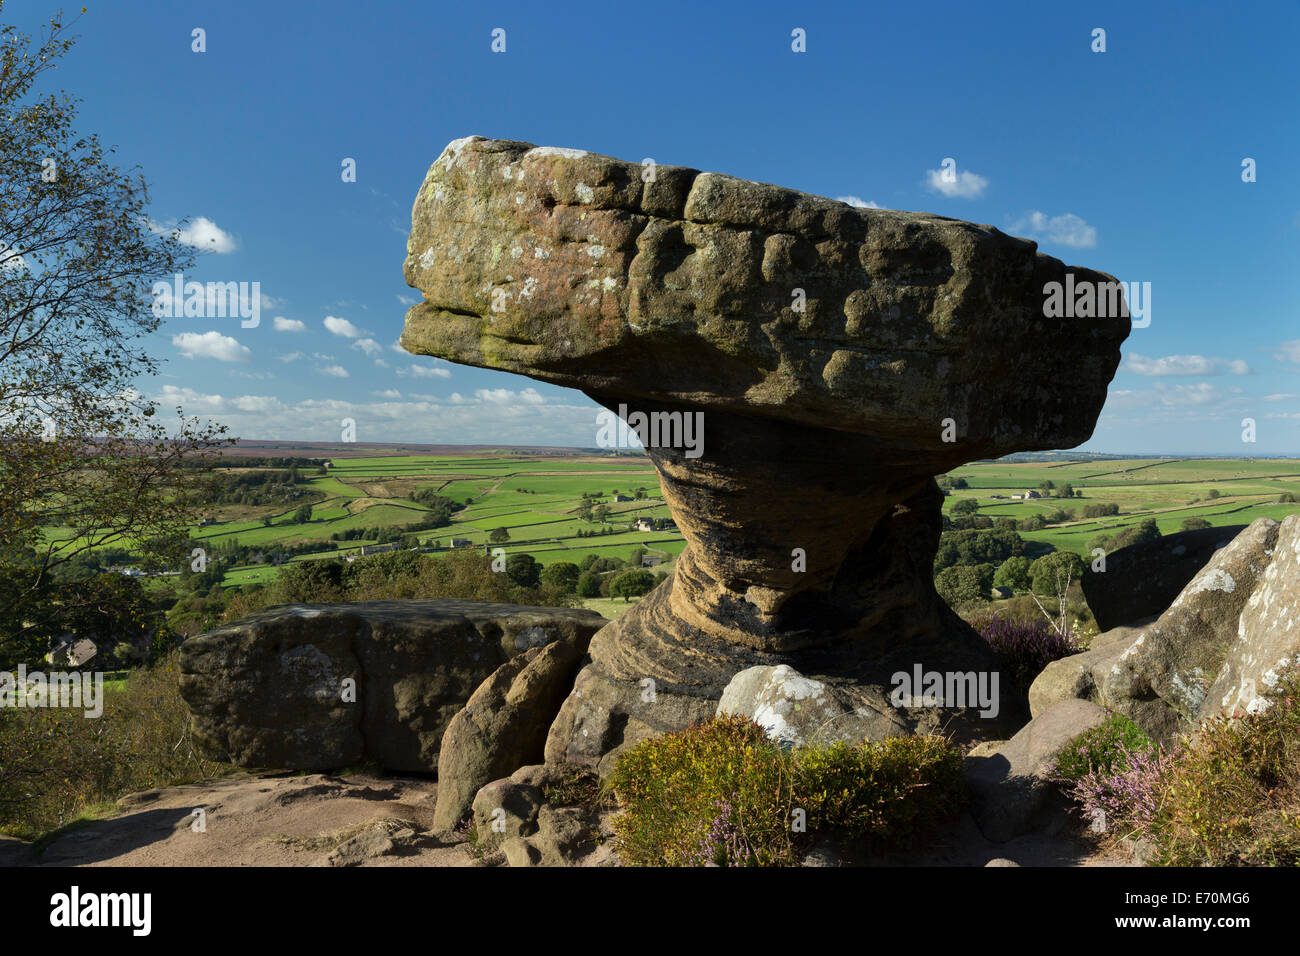 Brimham Rocks in Nidderdale, The Yorkshire dales, England. Stock Photo